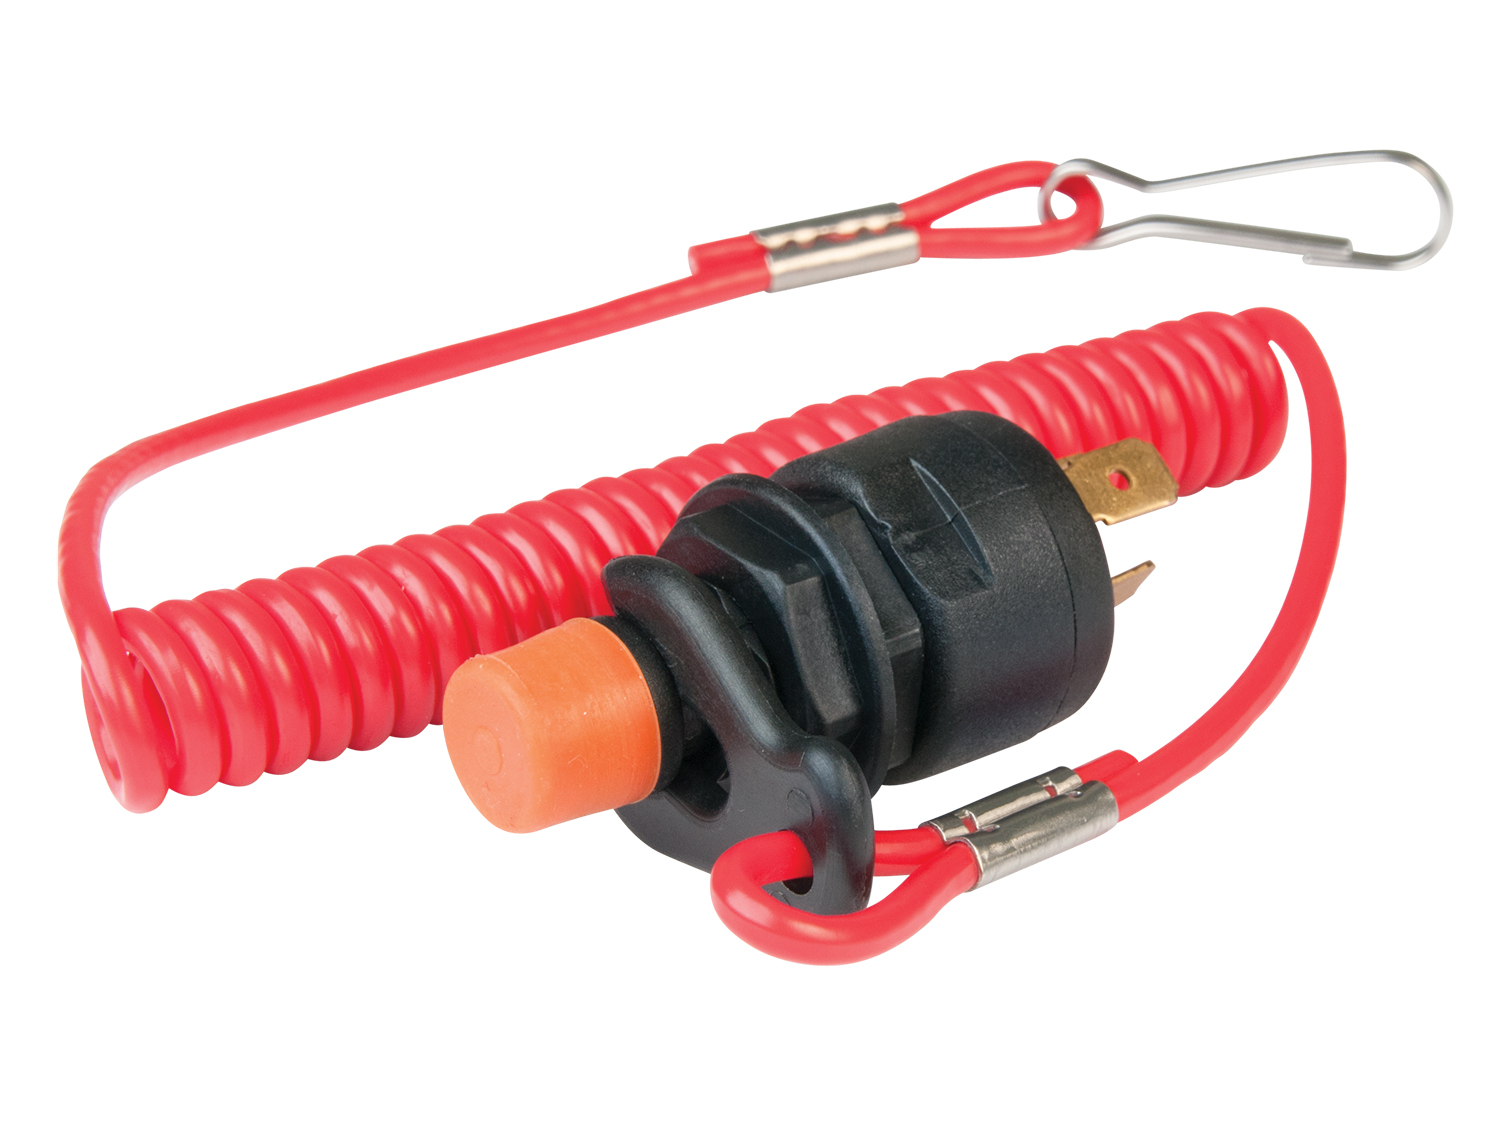 Kill Switch With Lanyard